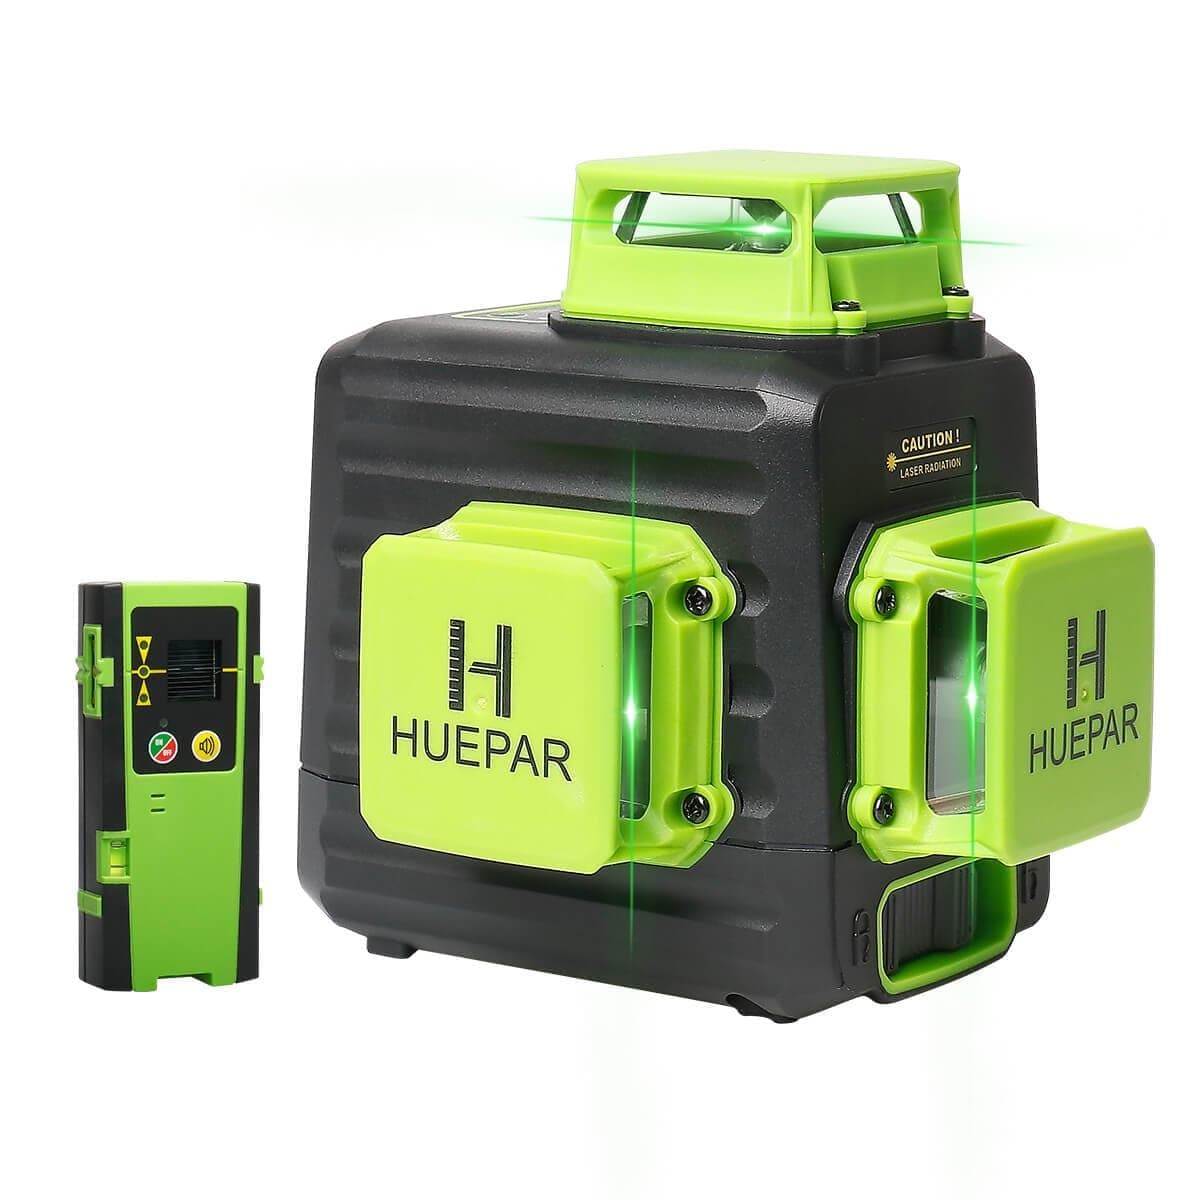 Huepar S04CG 16 lines 4D Cross Line Laser Level Bluetooth & Remote Control  Functions Green Beam Lines With Hard Carry Case - AliExpress